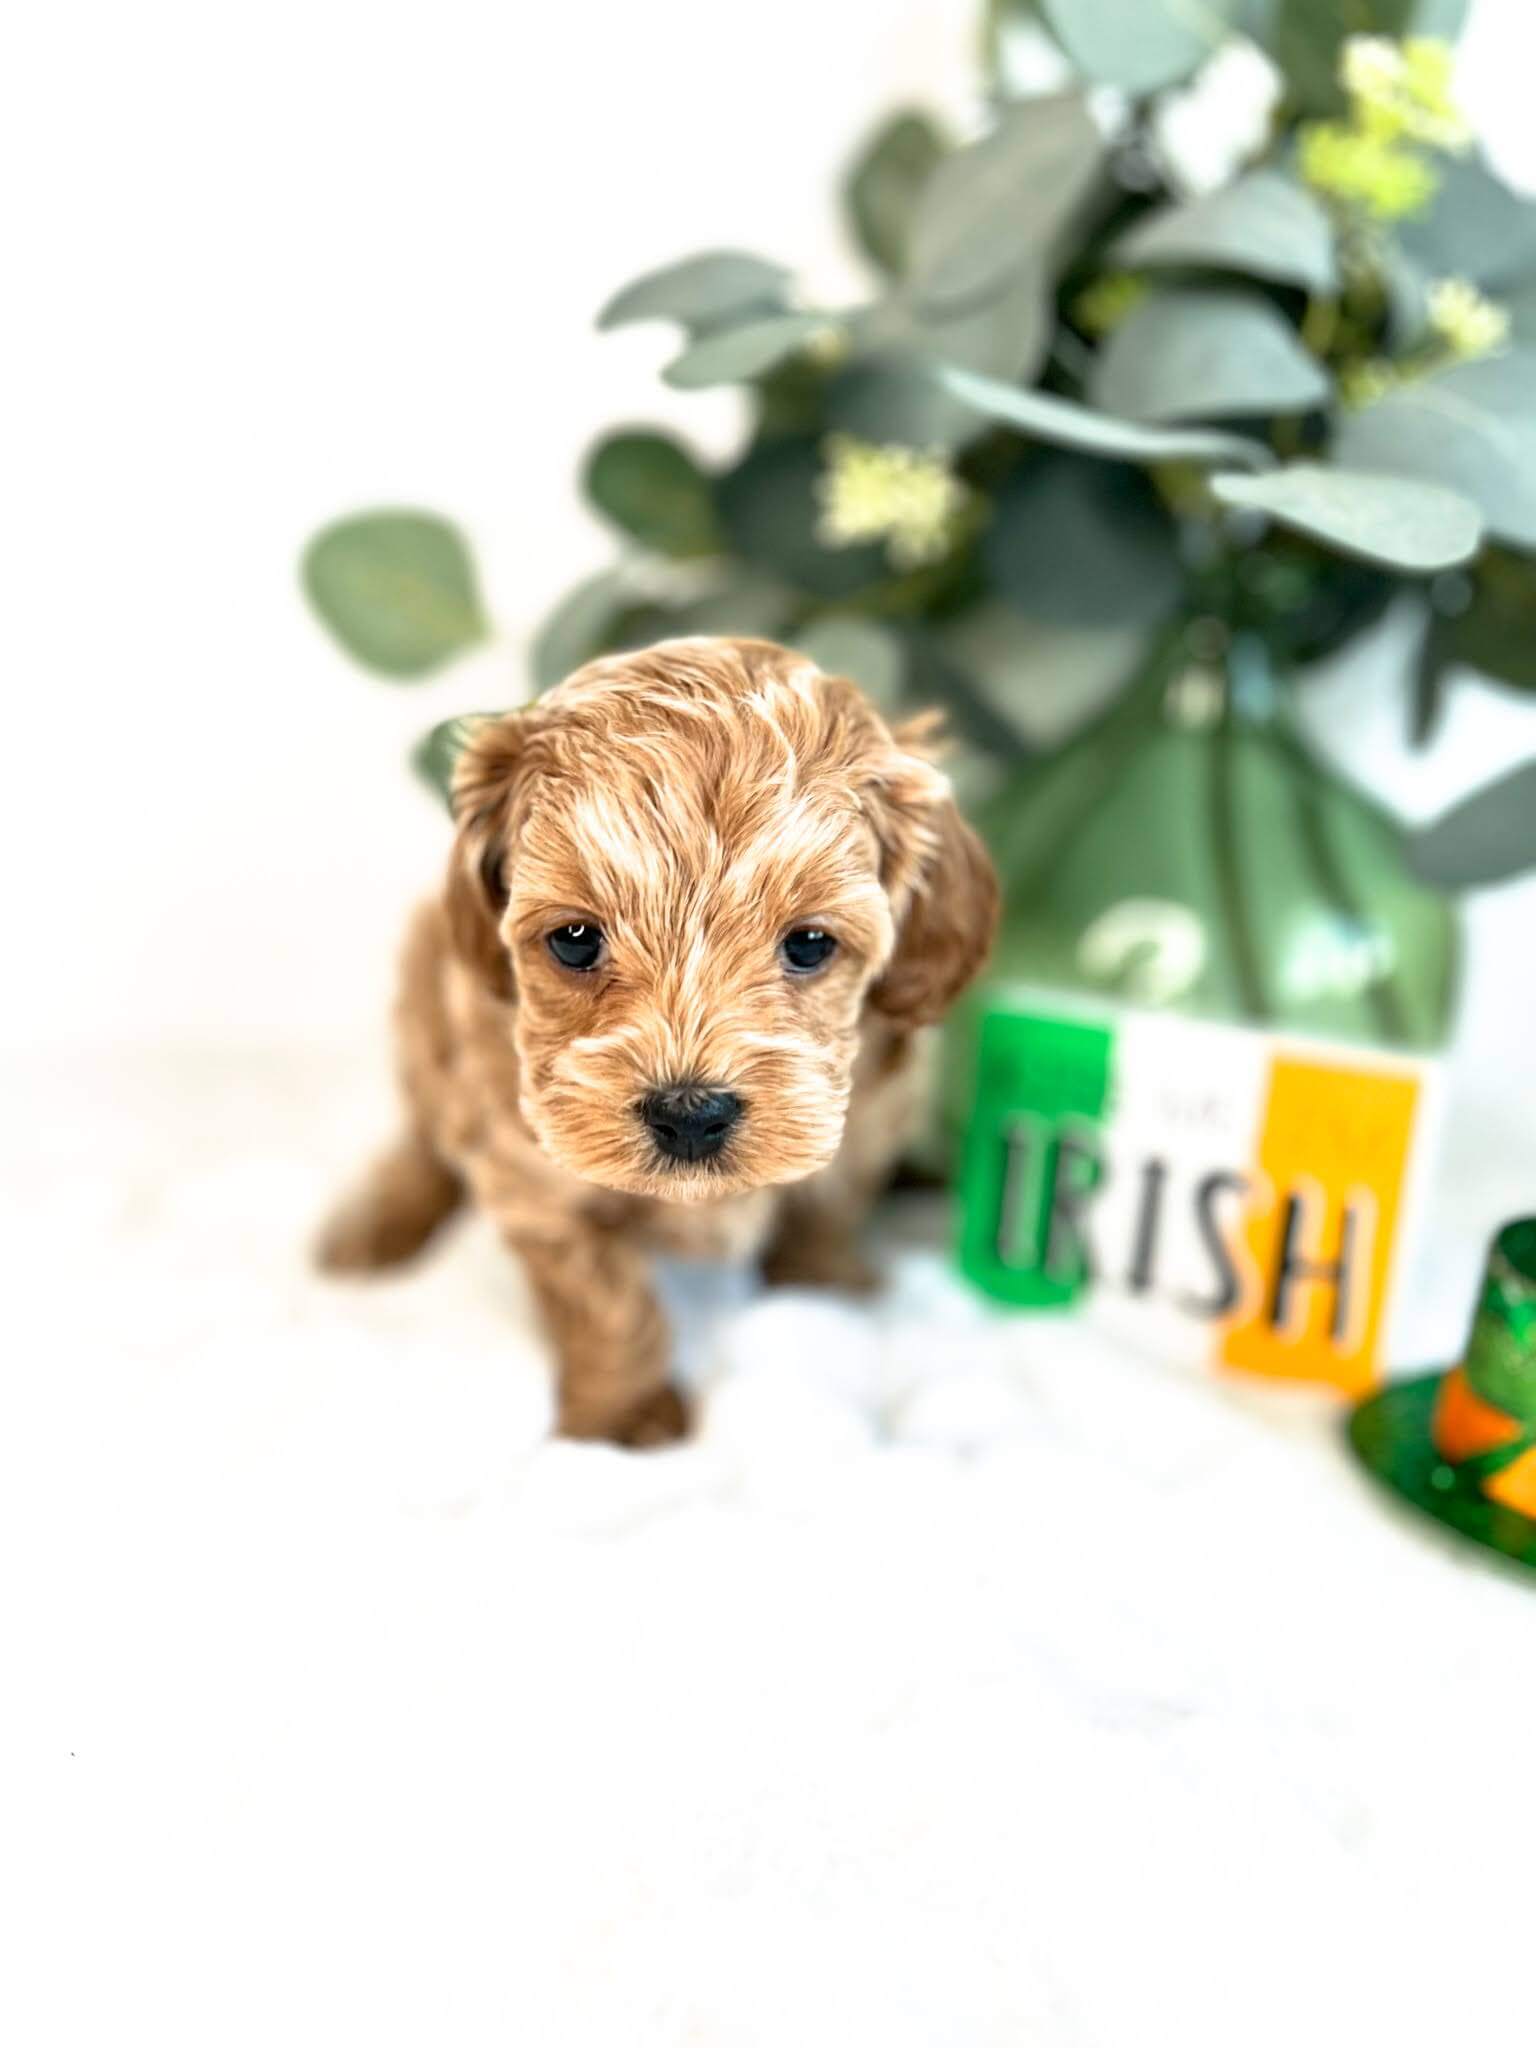 A small brown puppy stands beside a green vase, showcasing its adorable presence in a charming setting.